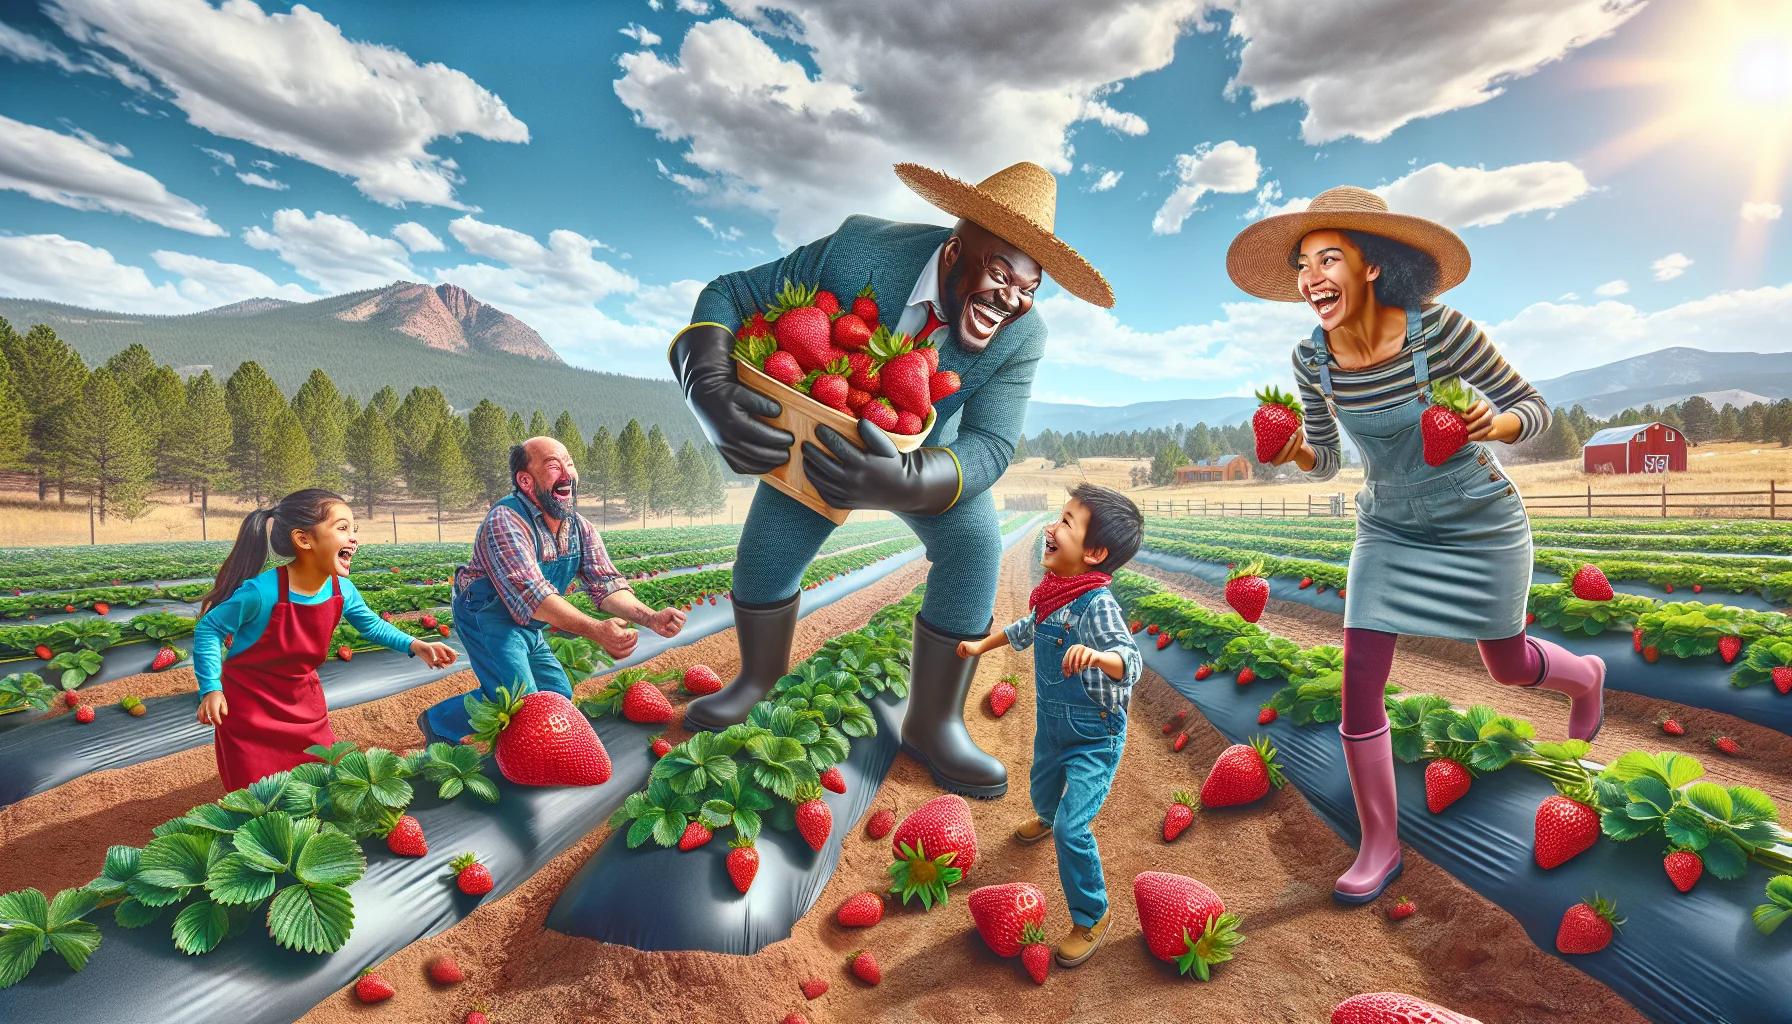 Create an amusing and enticing image to promote gardening. The setting is Colorado, where strawberry plants are flourishing under the blue sky. On the plot of land, an adult Hispanic man and an adult Black woman, both draped in gardening outfits, are engaging in a friendly strawberry harvesting competition. Their faces are filled with delight as they race to pick the most strawberries. Meanwhile, a group of children of various descents are laughing, running around and playing with the odd oversized strawberry left unintentionally by the gardeners. Make sure the image showcases the beauty of Colorado and the joy of gardening.